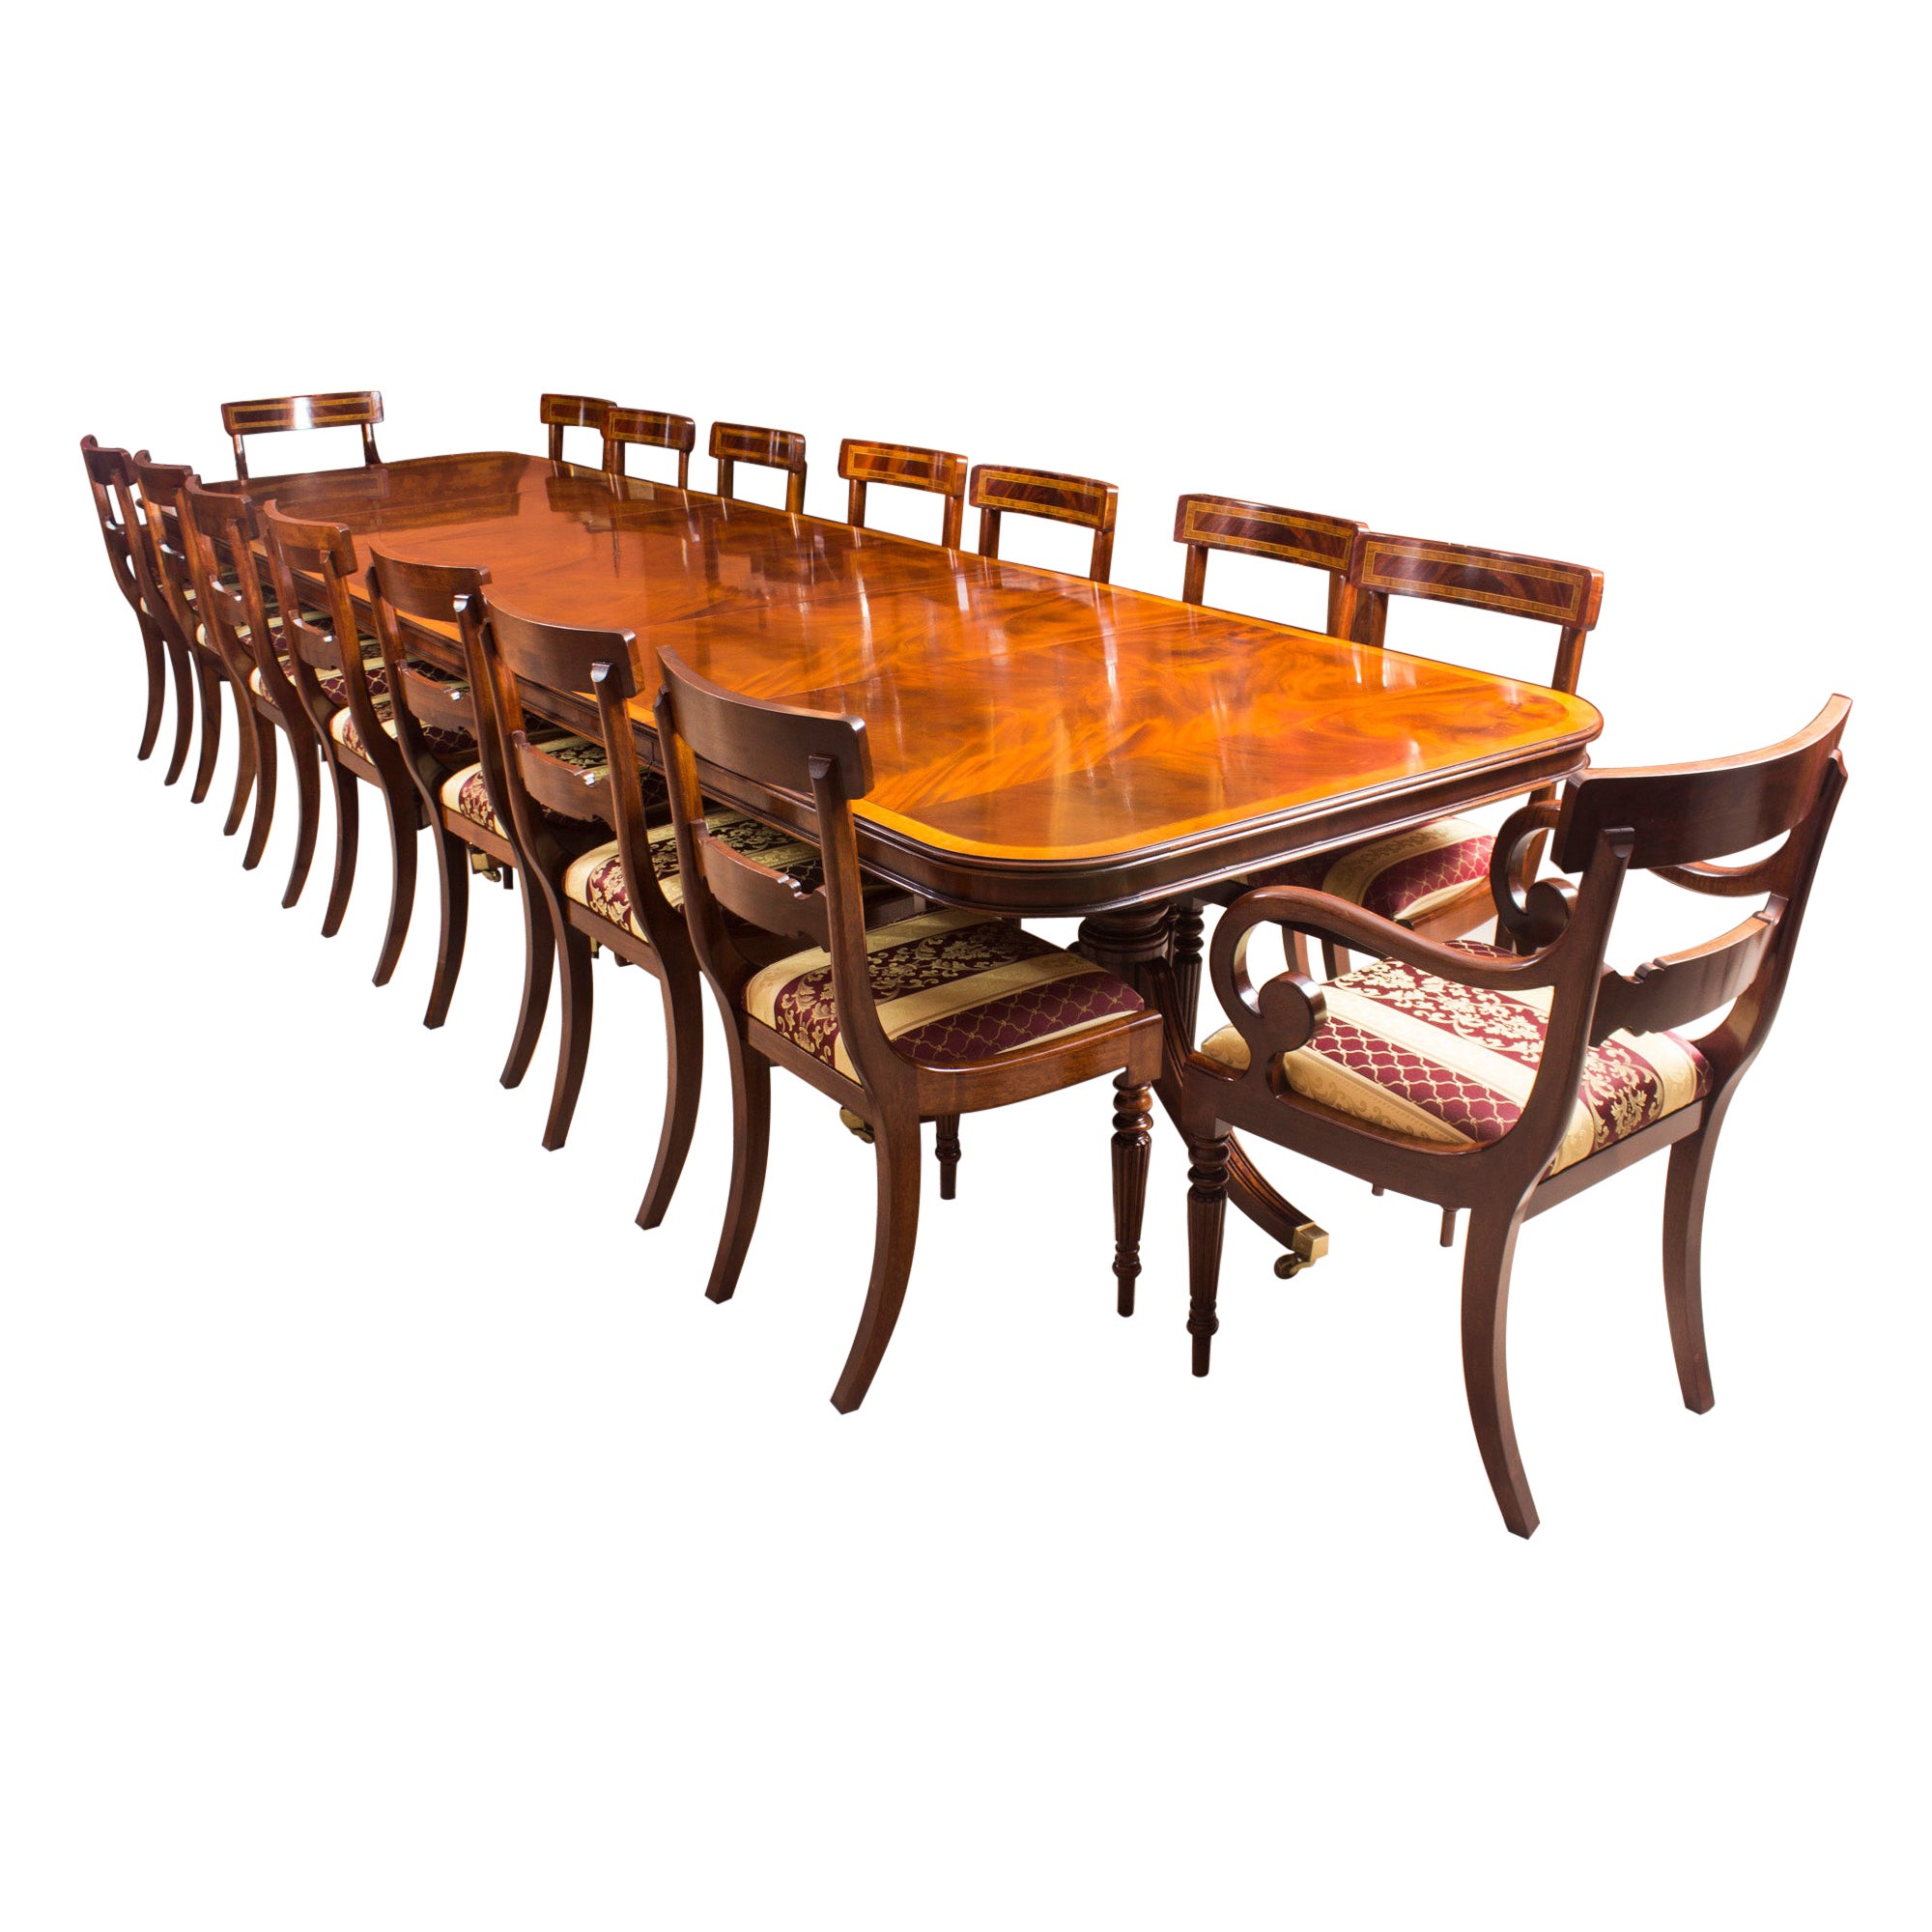 Vintage 14 ft Three Pillar Mahogany Dining Table and 16 Chairs 20th Century For Sale